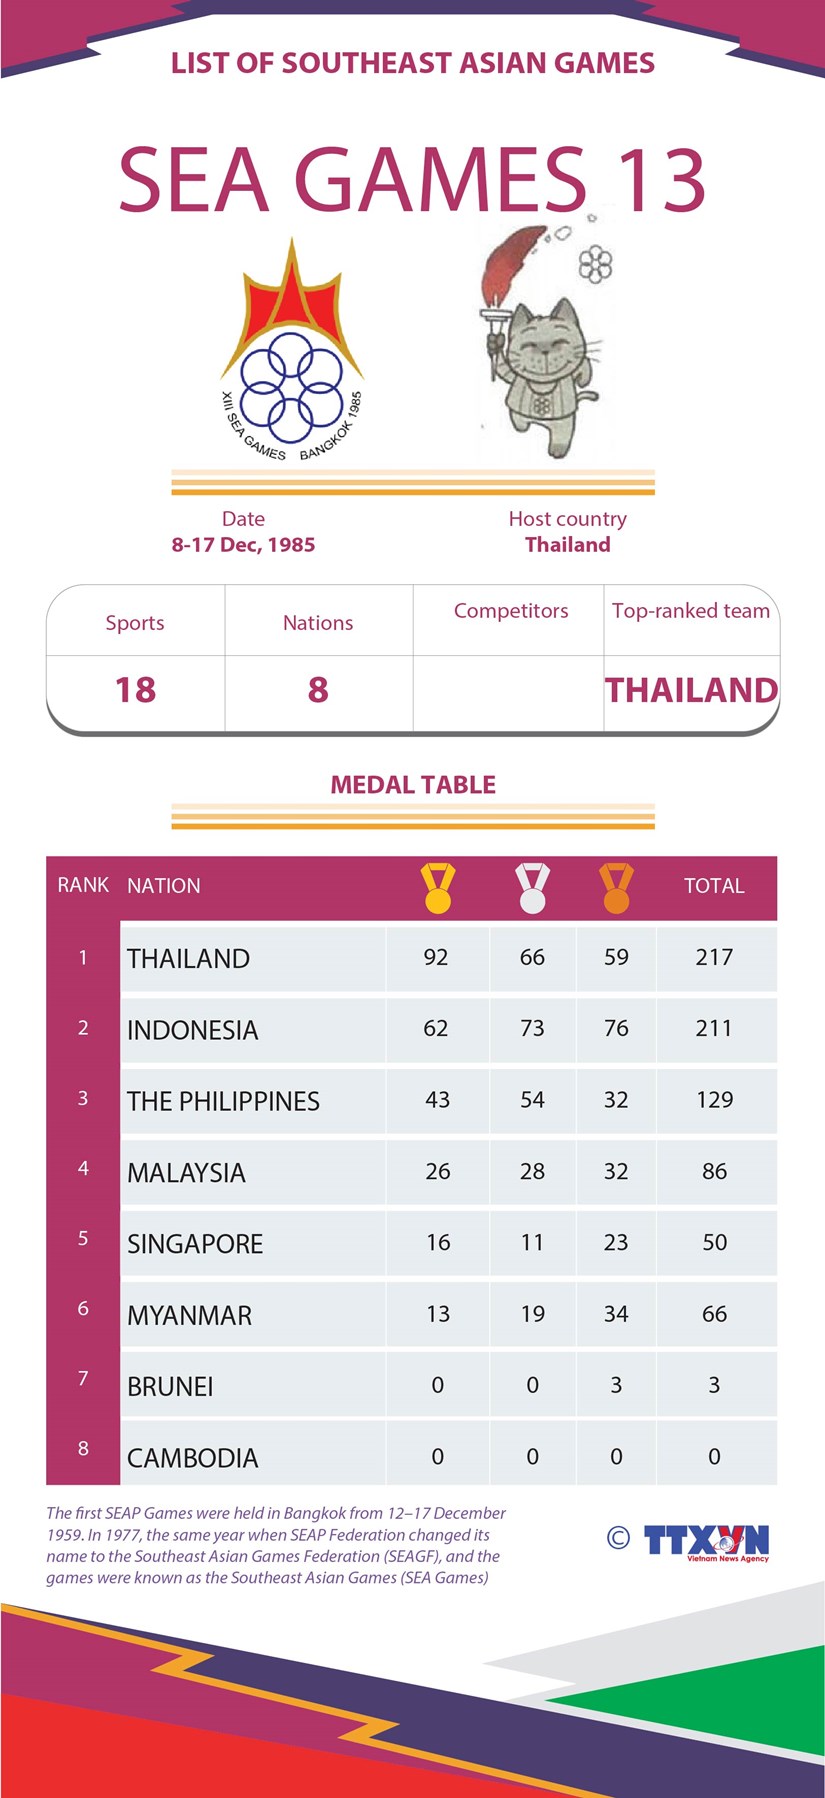 List of Southeast Asian Games: SEA Games 13 hinh anh 1